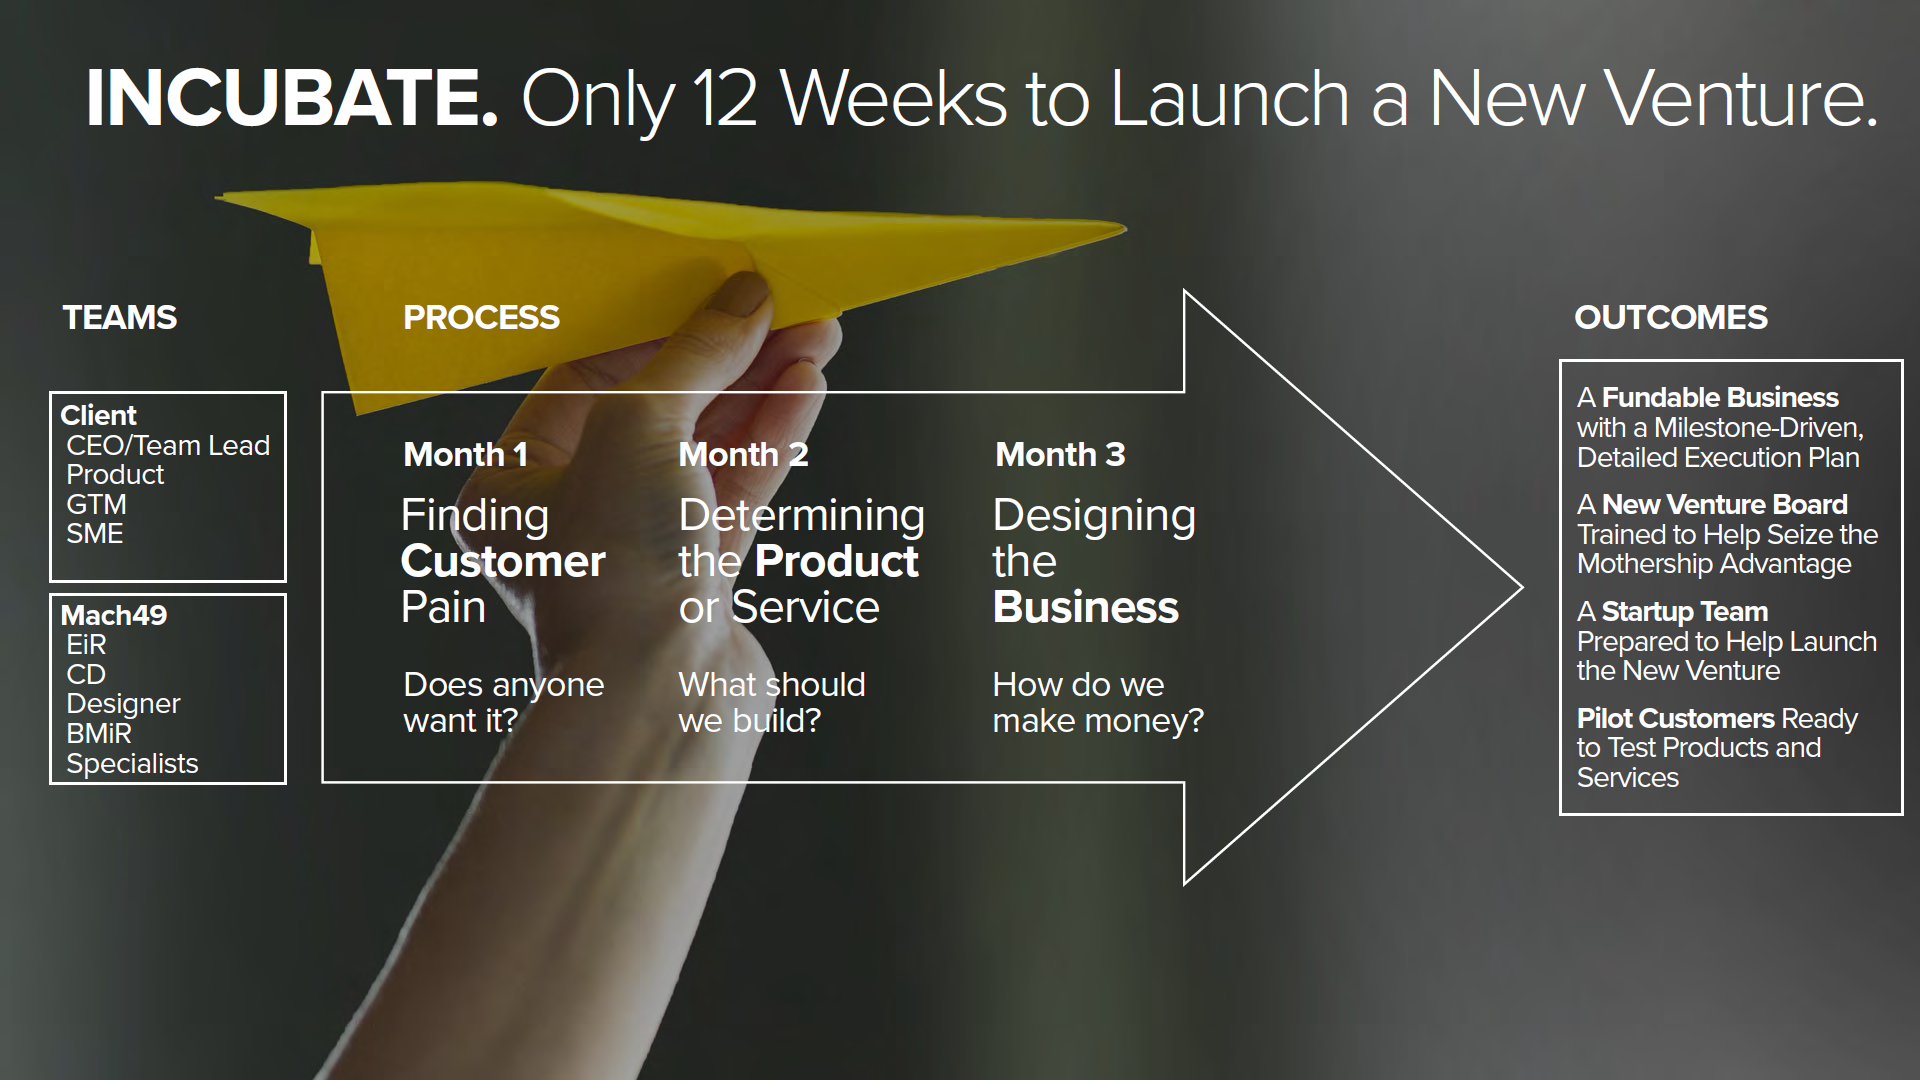 Incubate. Only 12 Weeks to Launch a New Venture